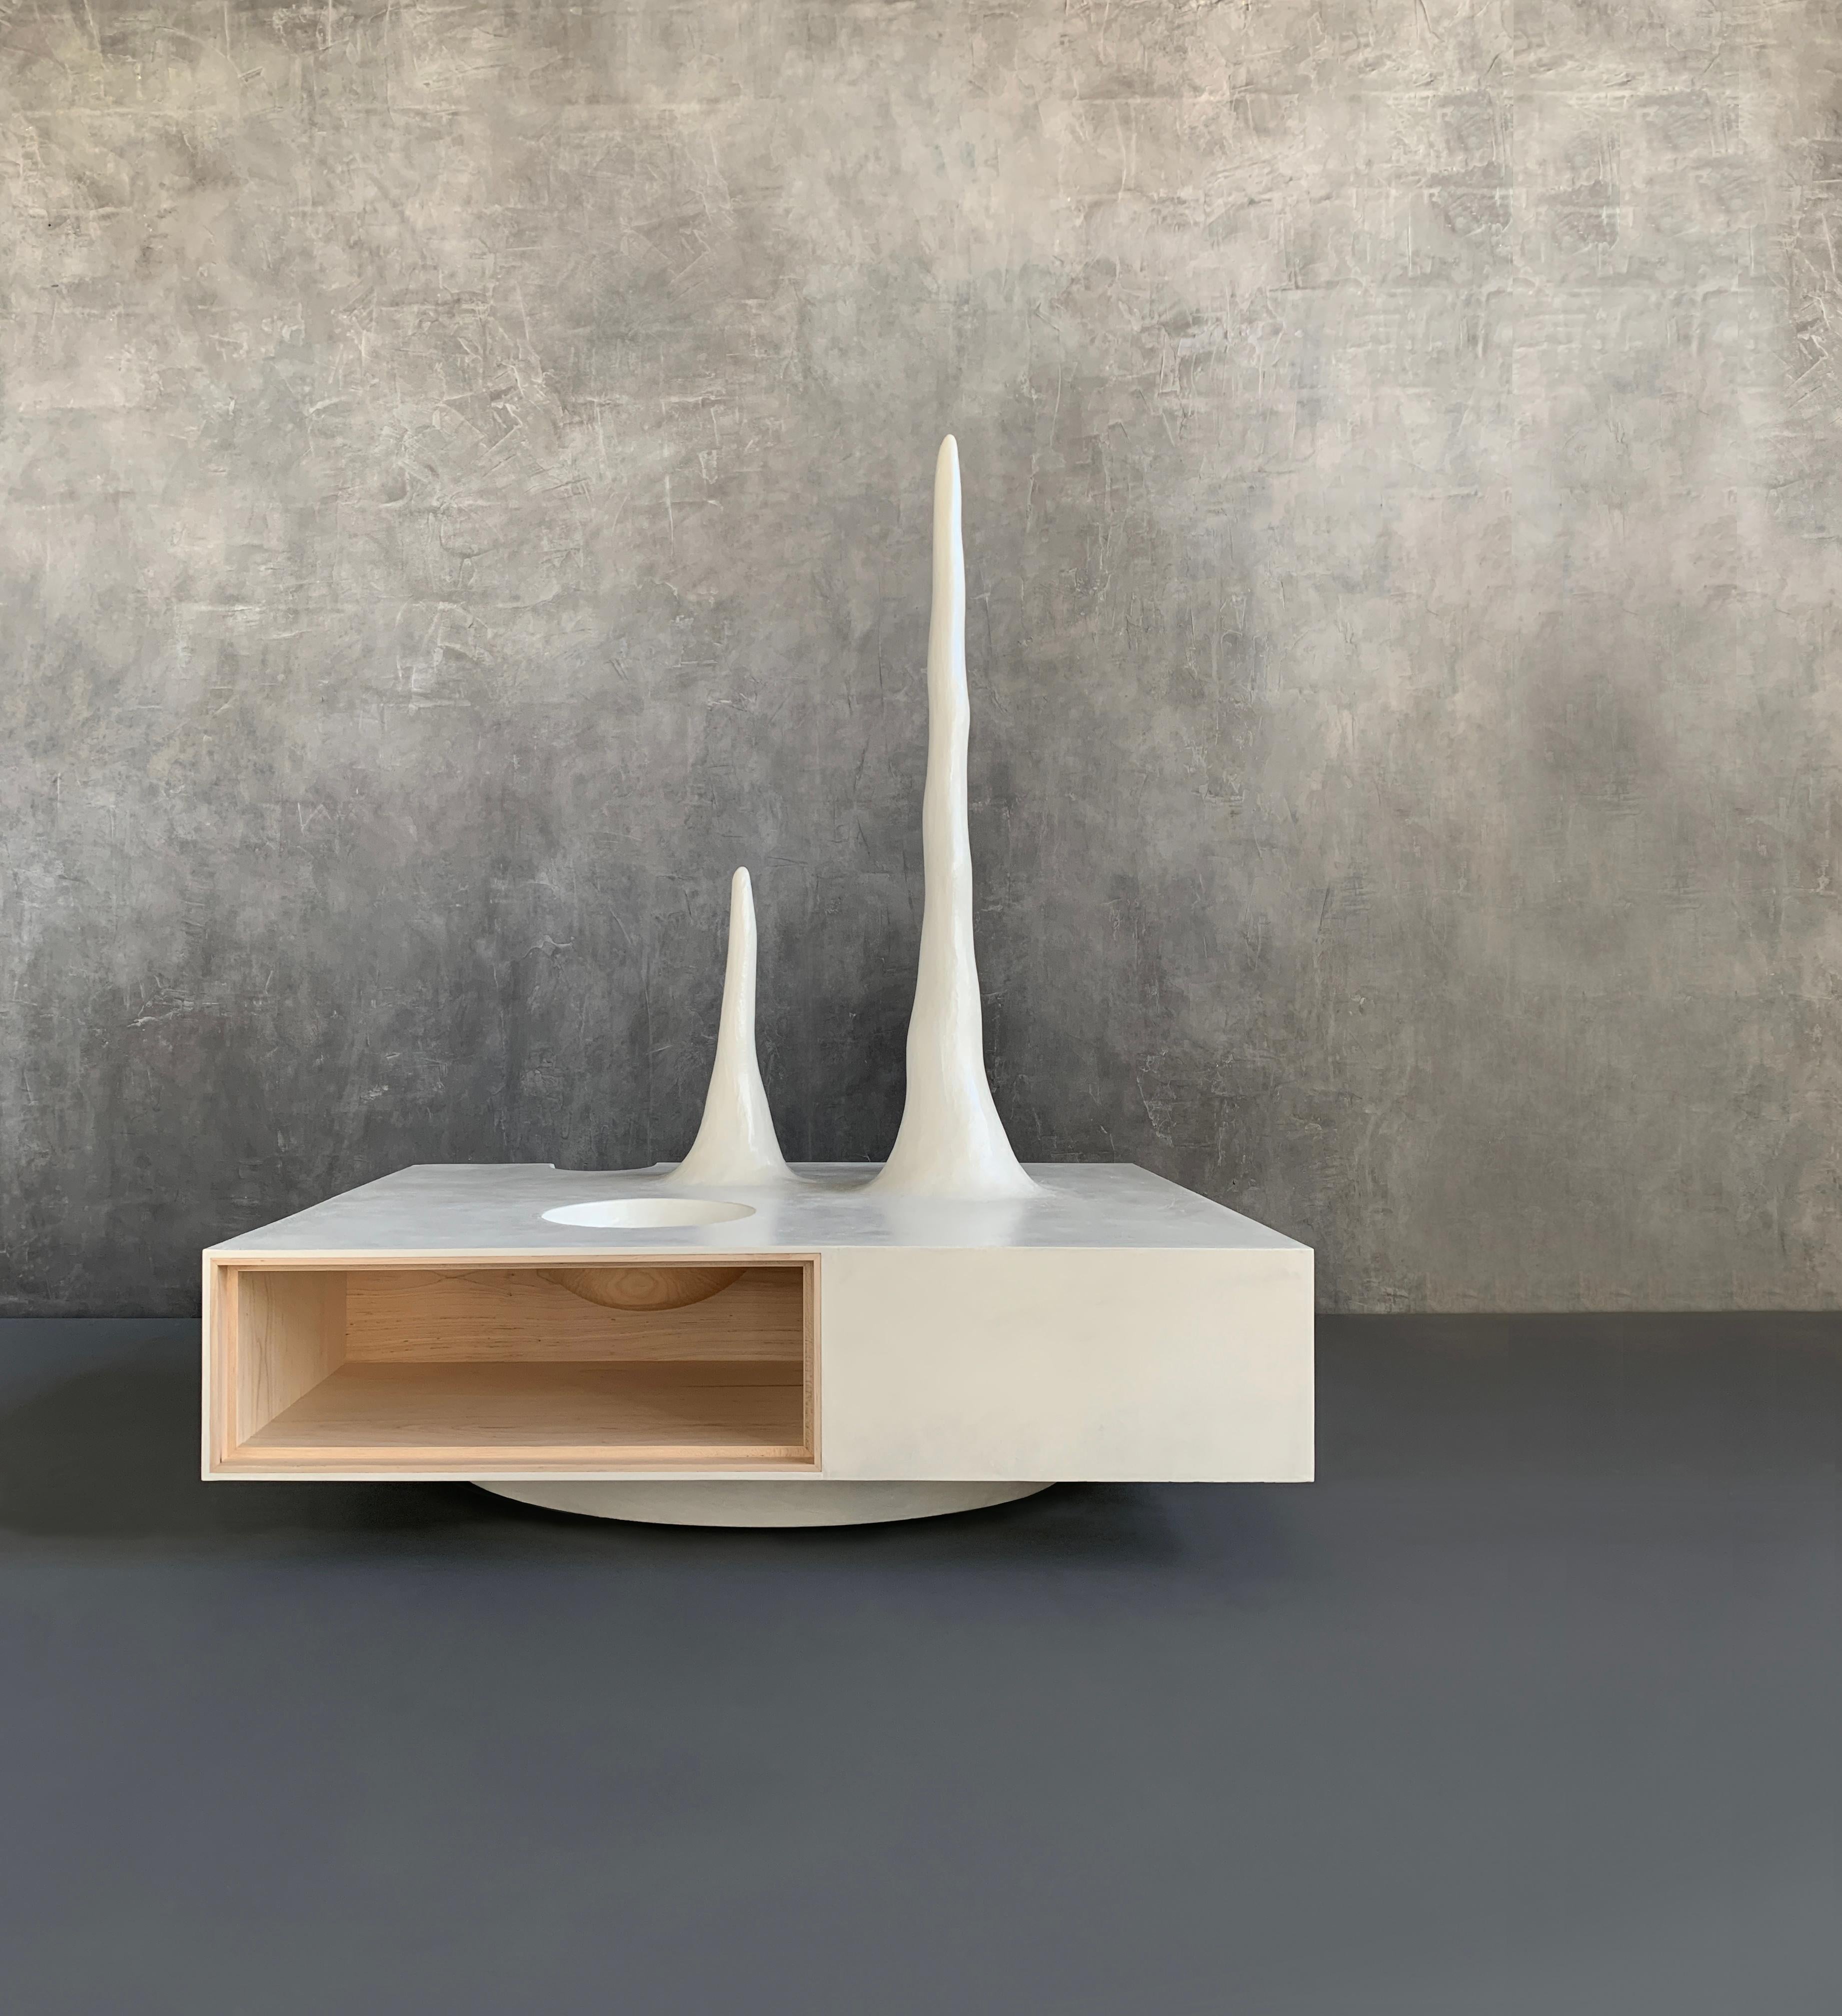 Kavrn Cocktail Table, 2022
Polished concrete and maple
57 x 42 x 36 in  
Surface height: 14 in